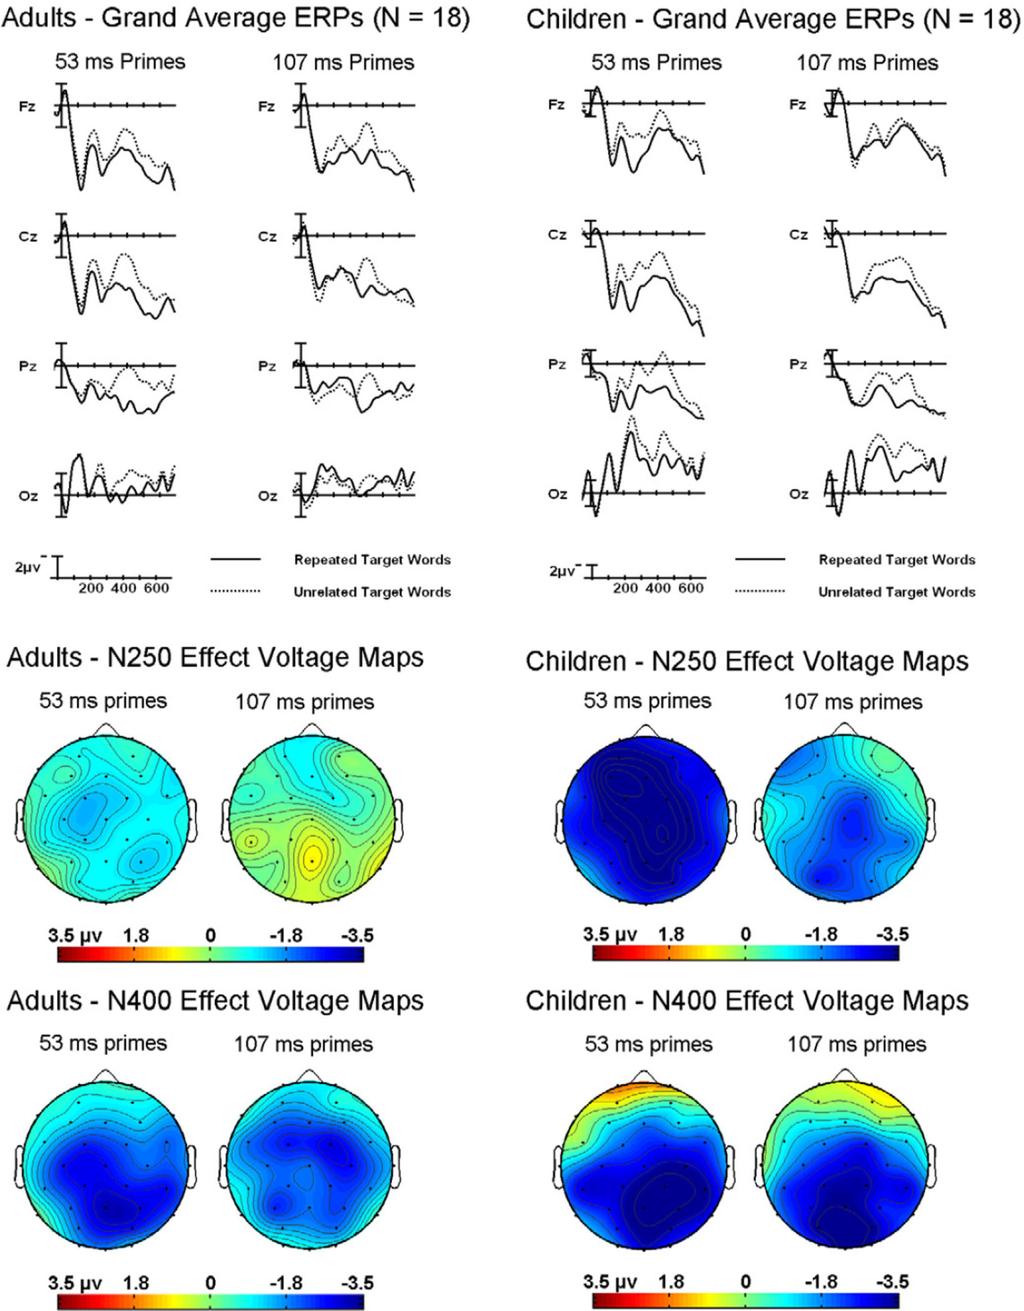 Eddy et al. Page 11 Figure 1. Grand average ERPs and voltage maps. Top left: ERP waveforms for adults. Bottom left: Voltage maps for adults. Top right: ERP waveforms for children.